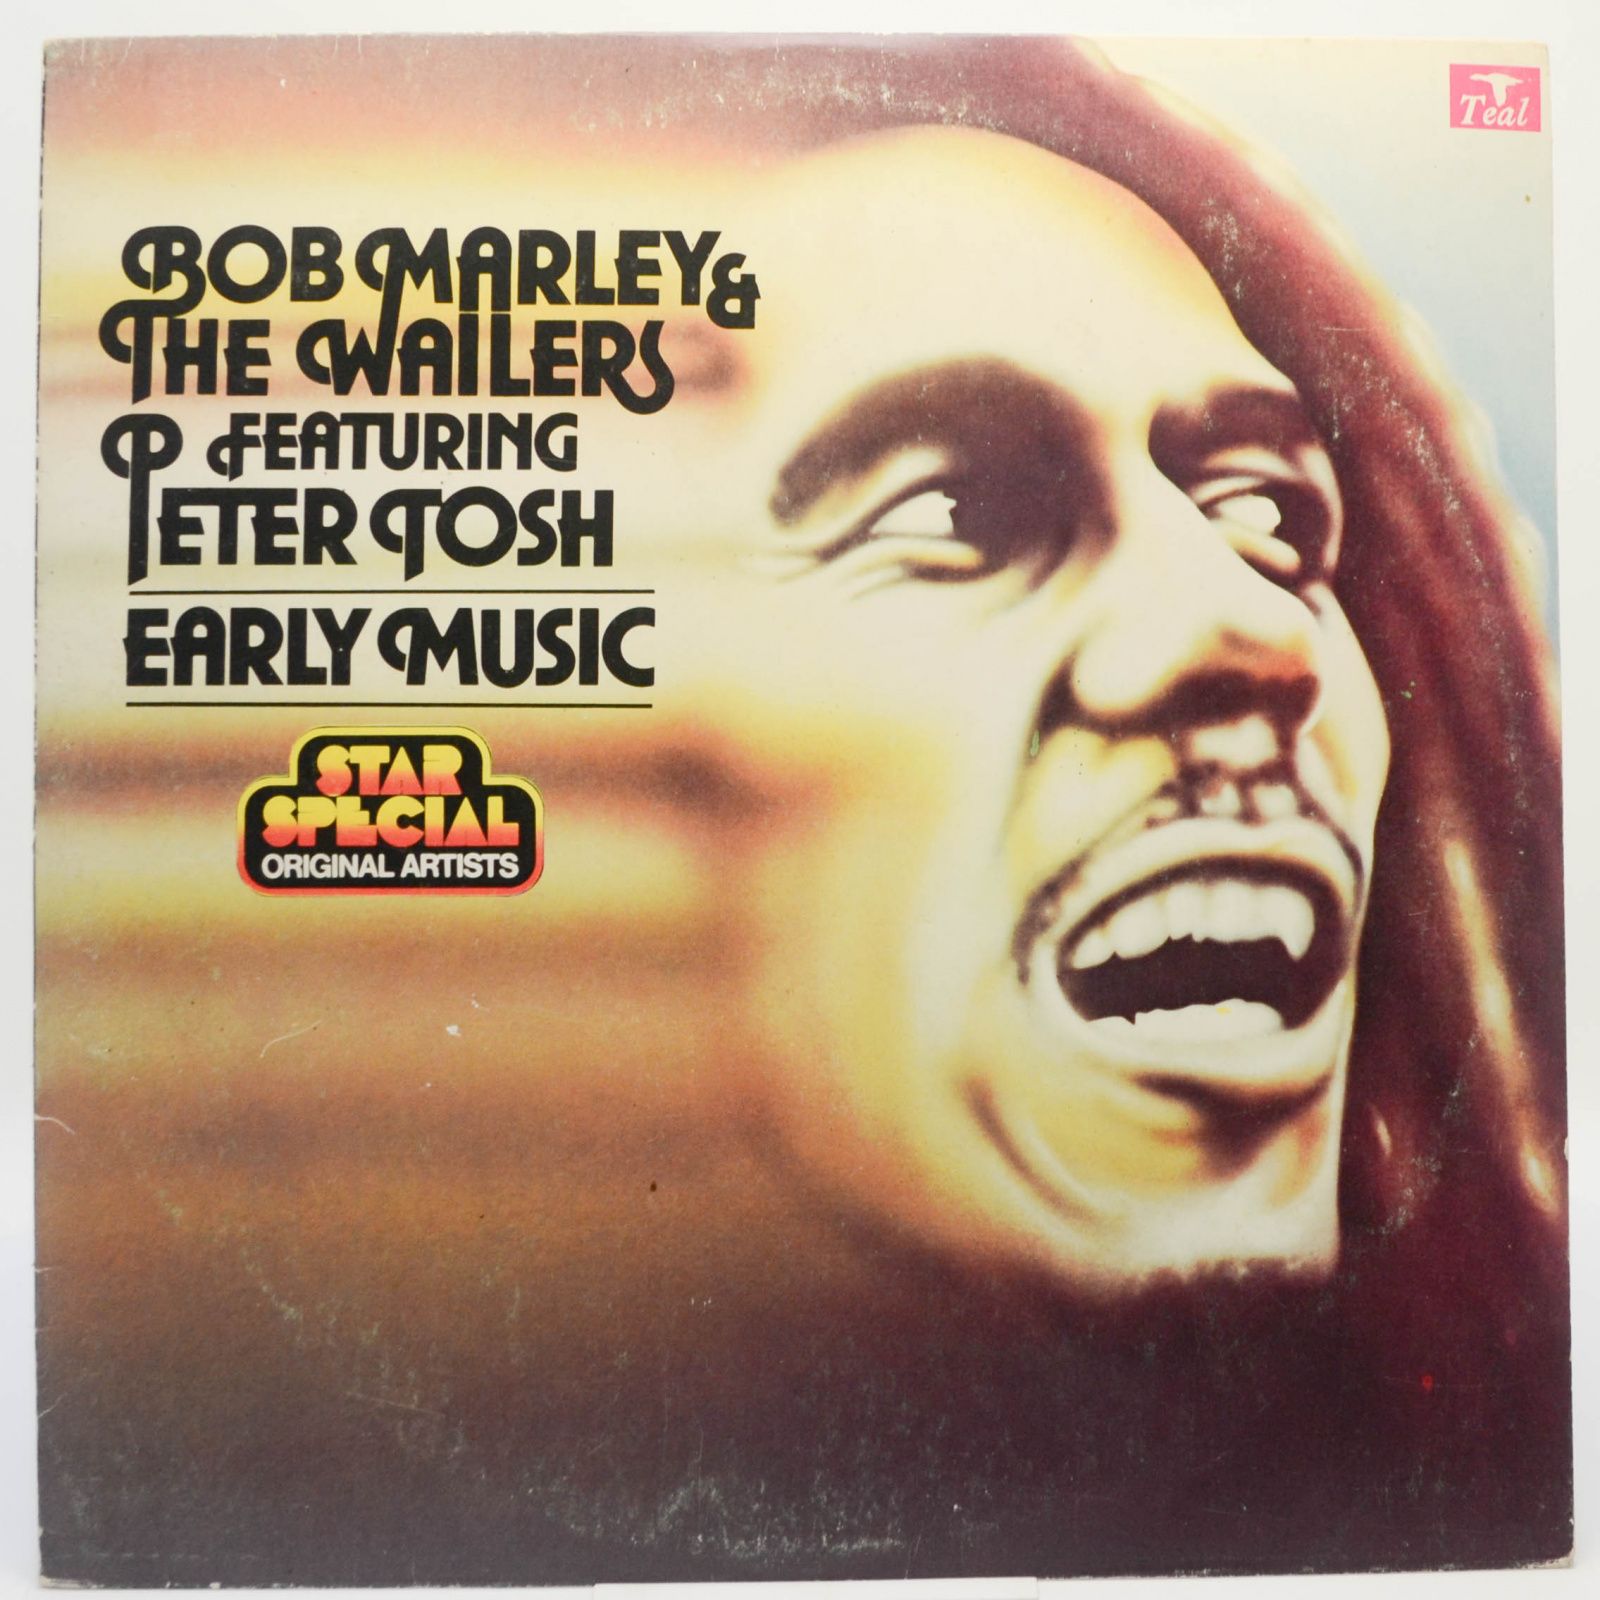 Bob Marley & The Wailers Featuring Peter Tosh — Early Music, 1979